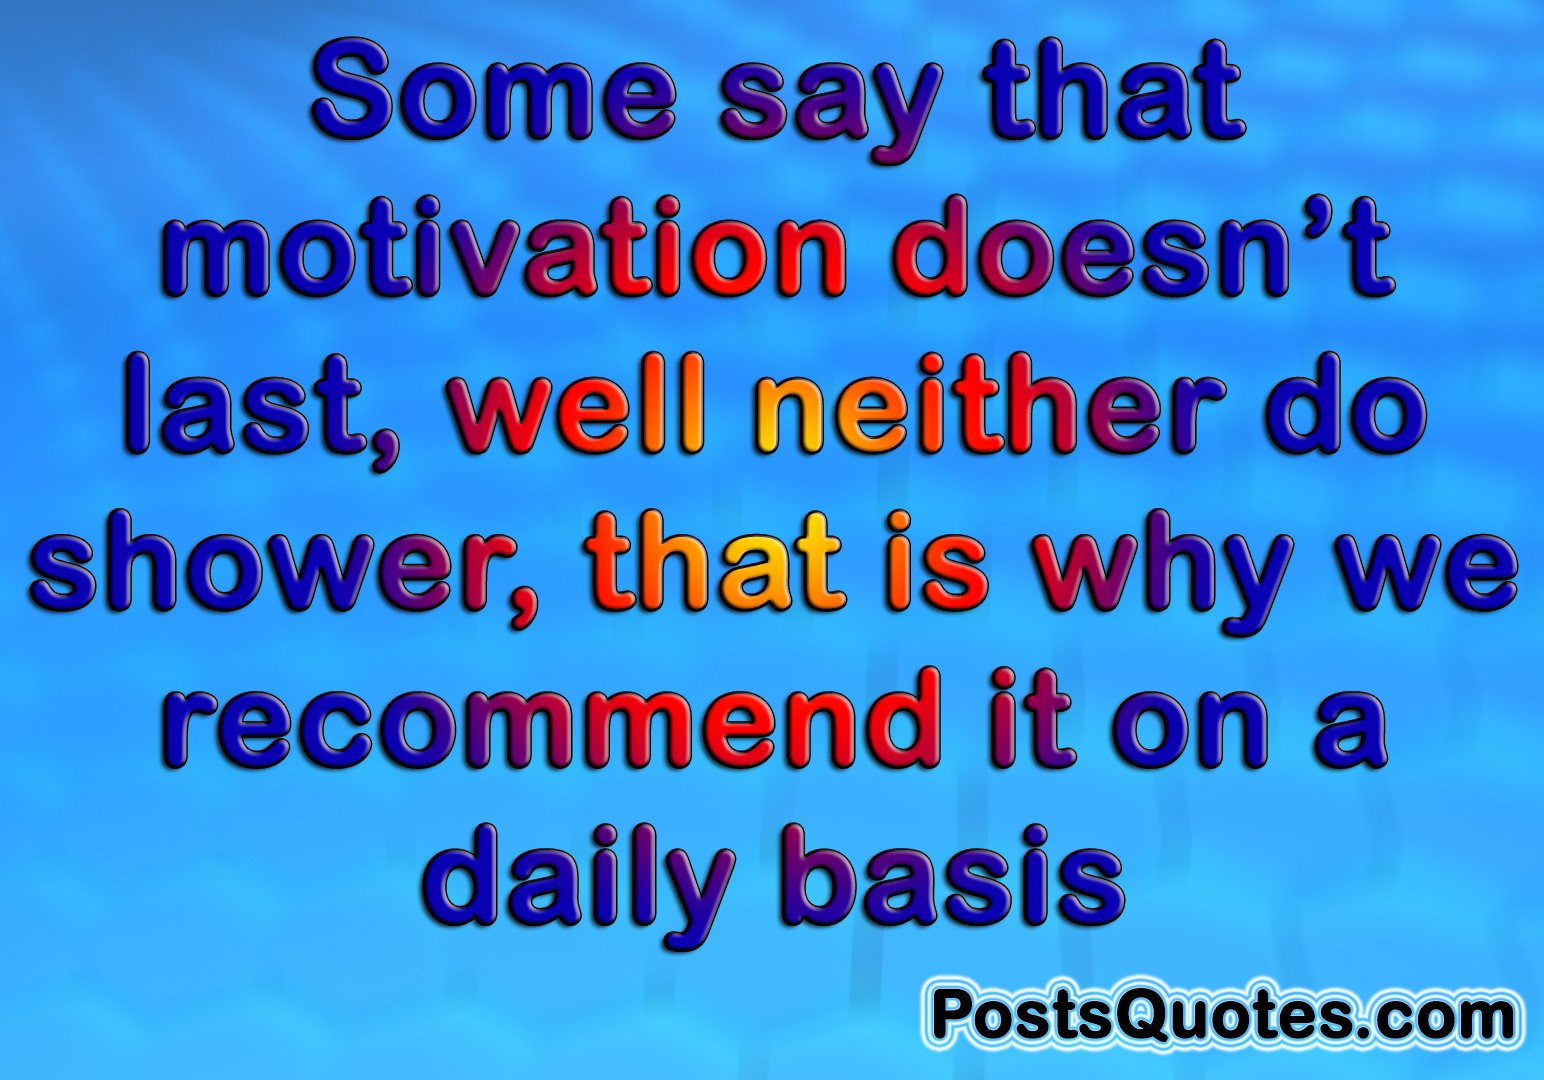 Everyday Motivational Quotes
 Daily Motivational Quotes